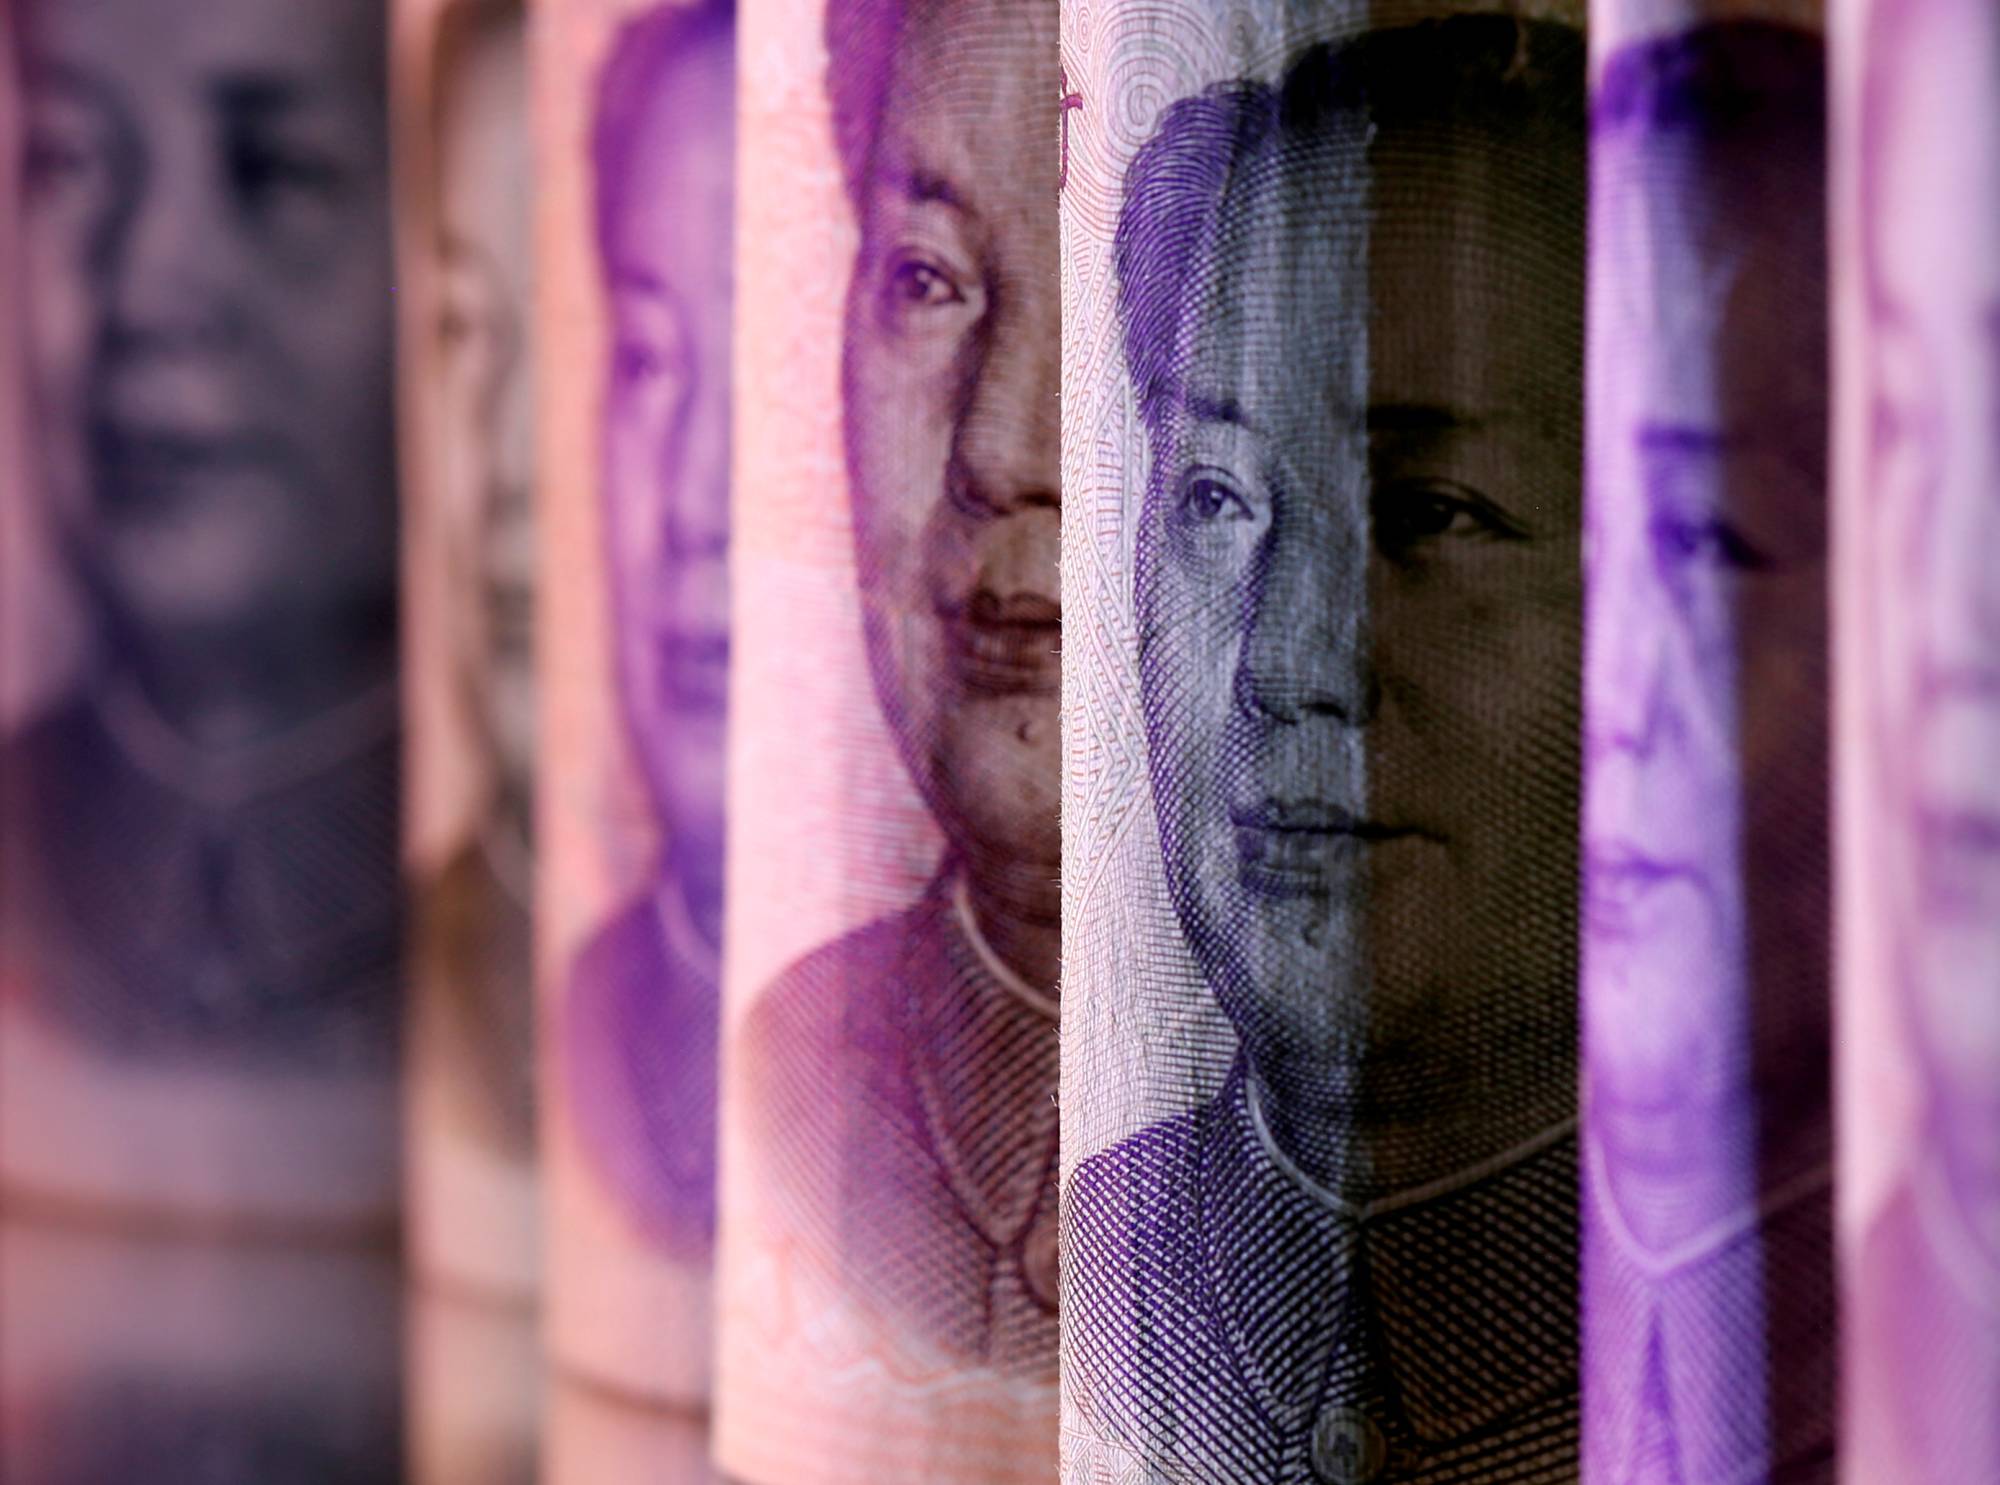 Unlike the physical currency, the digital yuan may become a common platform for CBDCs, especially in emerging and developing countries. | REUTERS